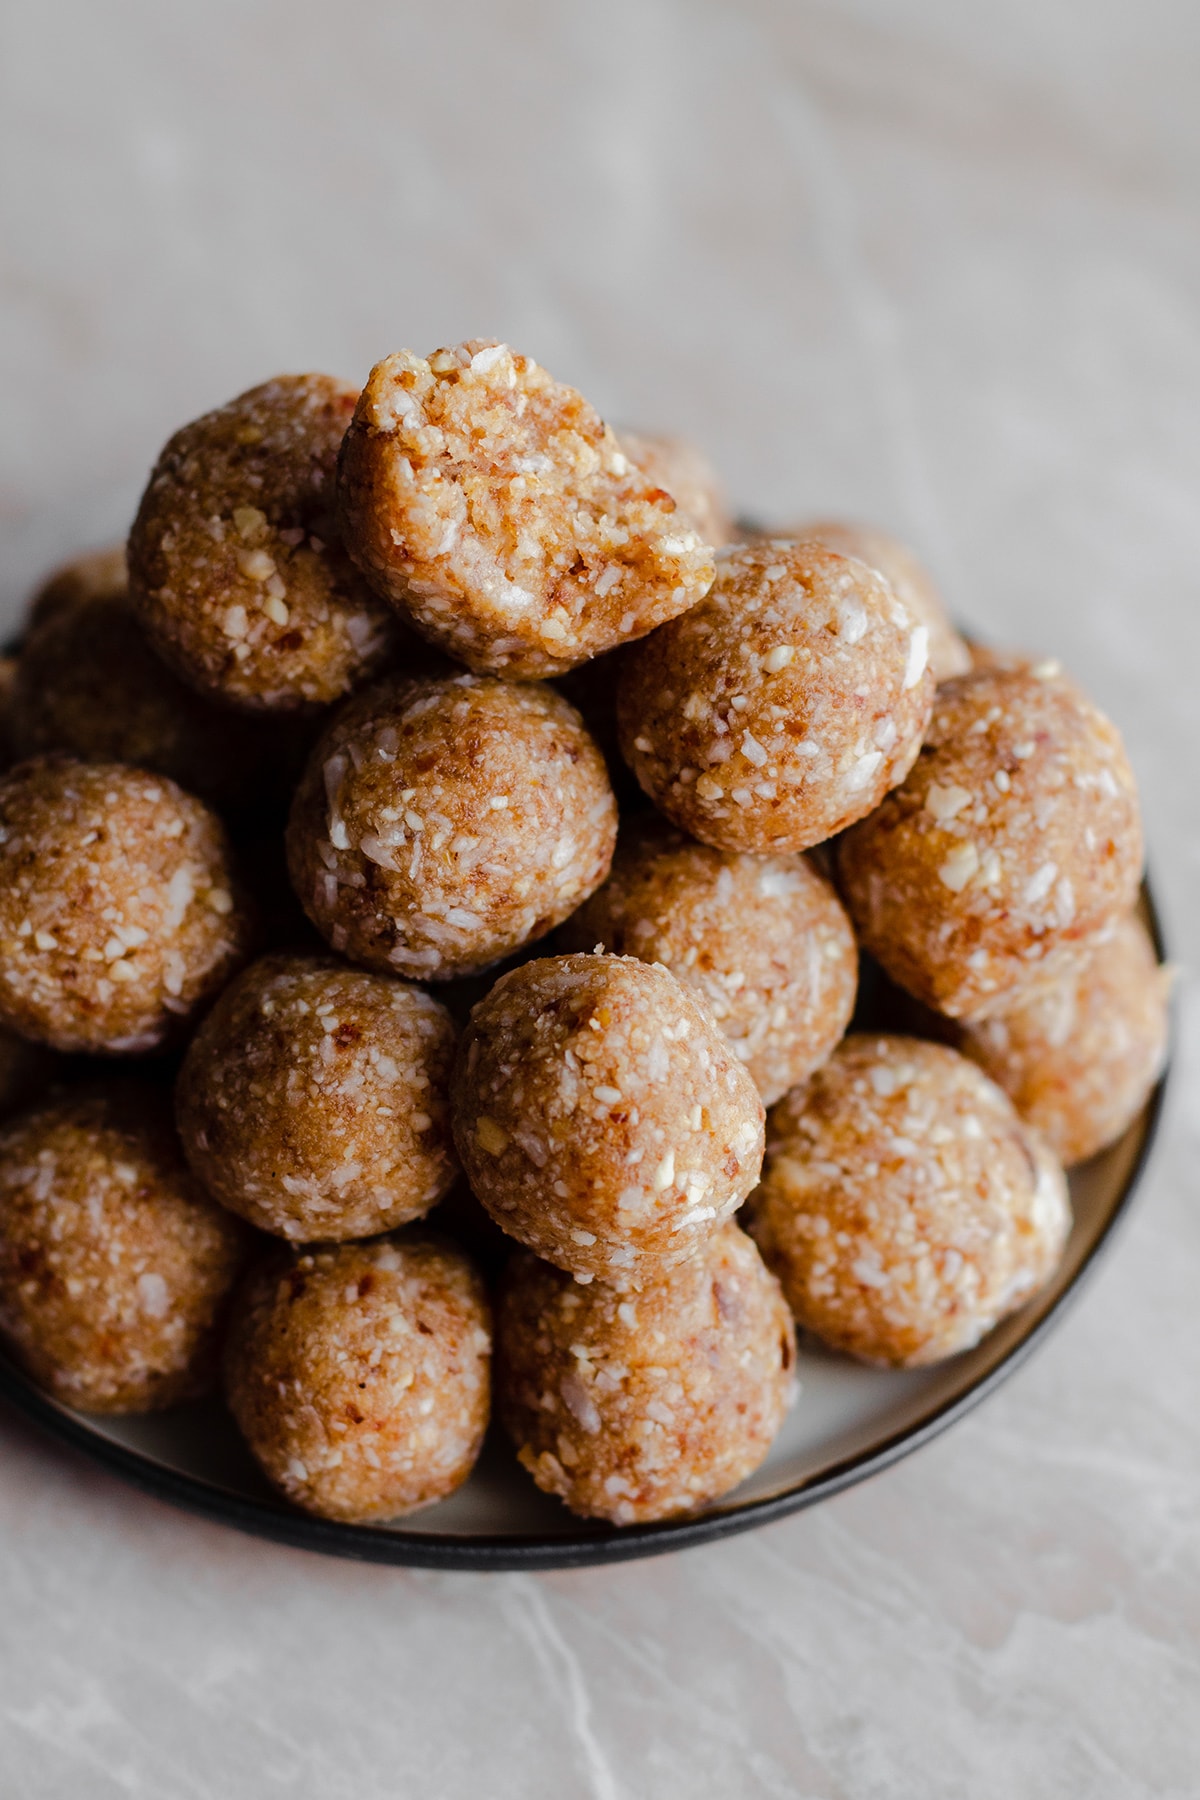 Coconut Energy Balls stacked up on a plate. Light marble background. With a bite taken out of the ball on the top.